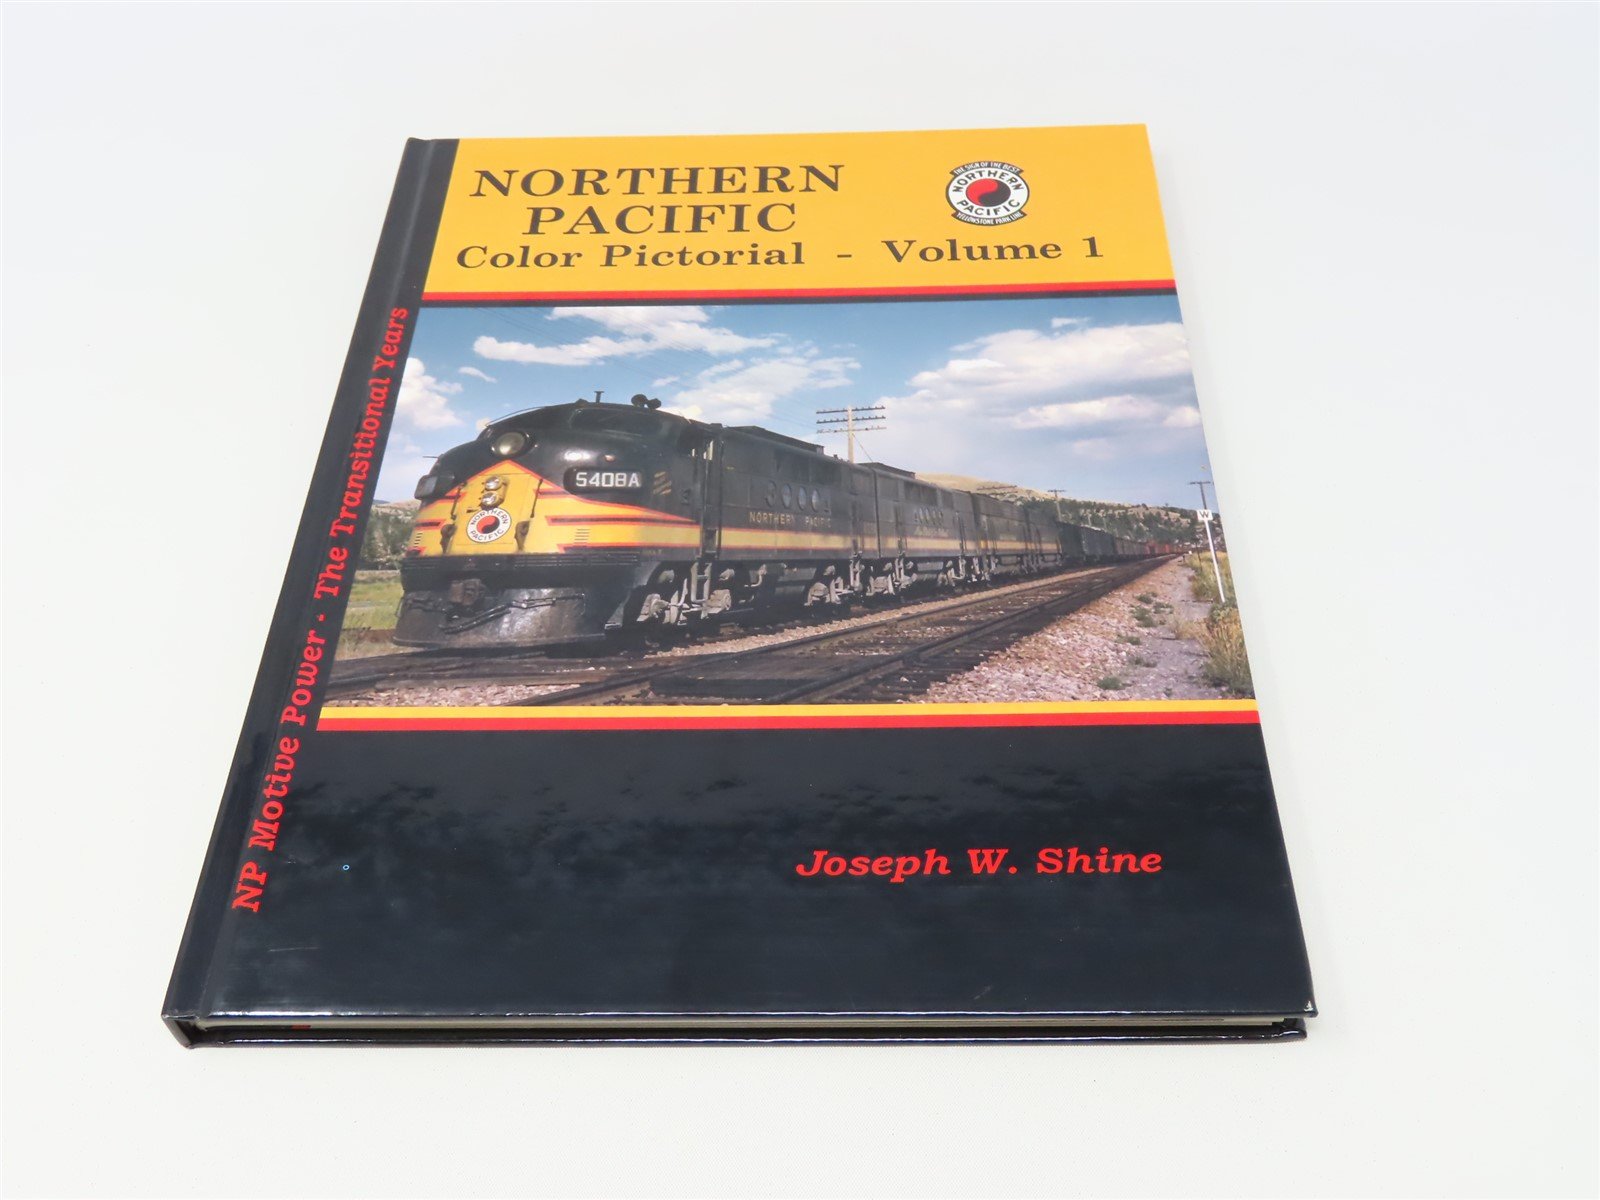 Northern Pacific Color Pictorial, Vol. 1 by Joseph W Shine ©1994 HC Book